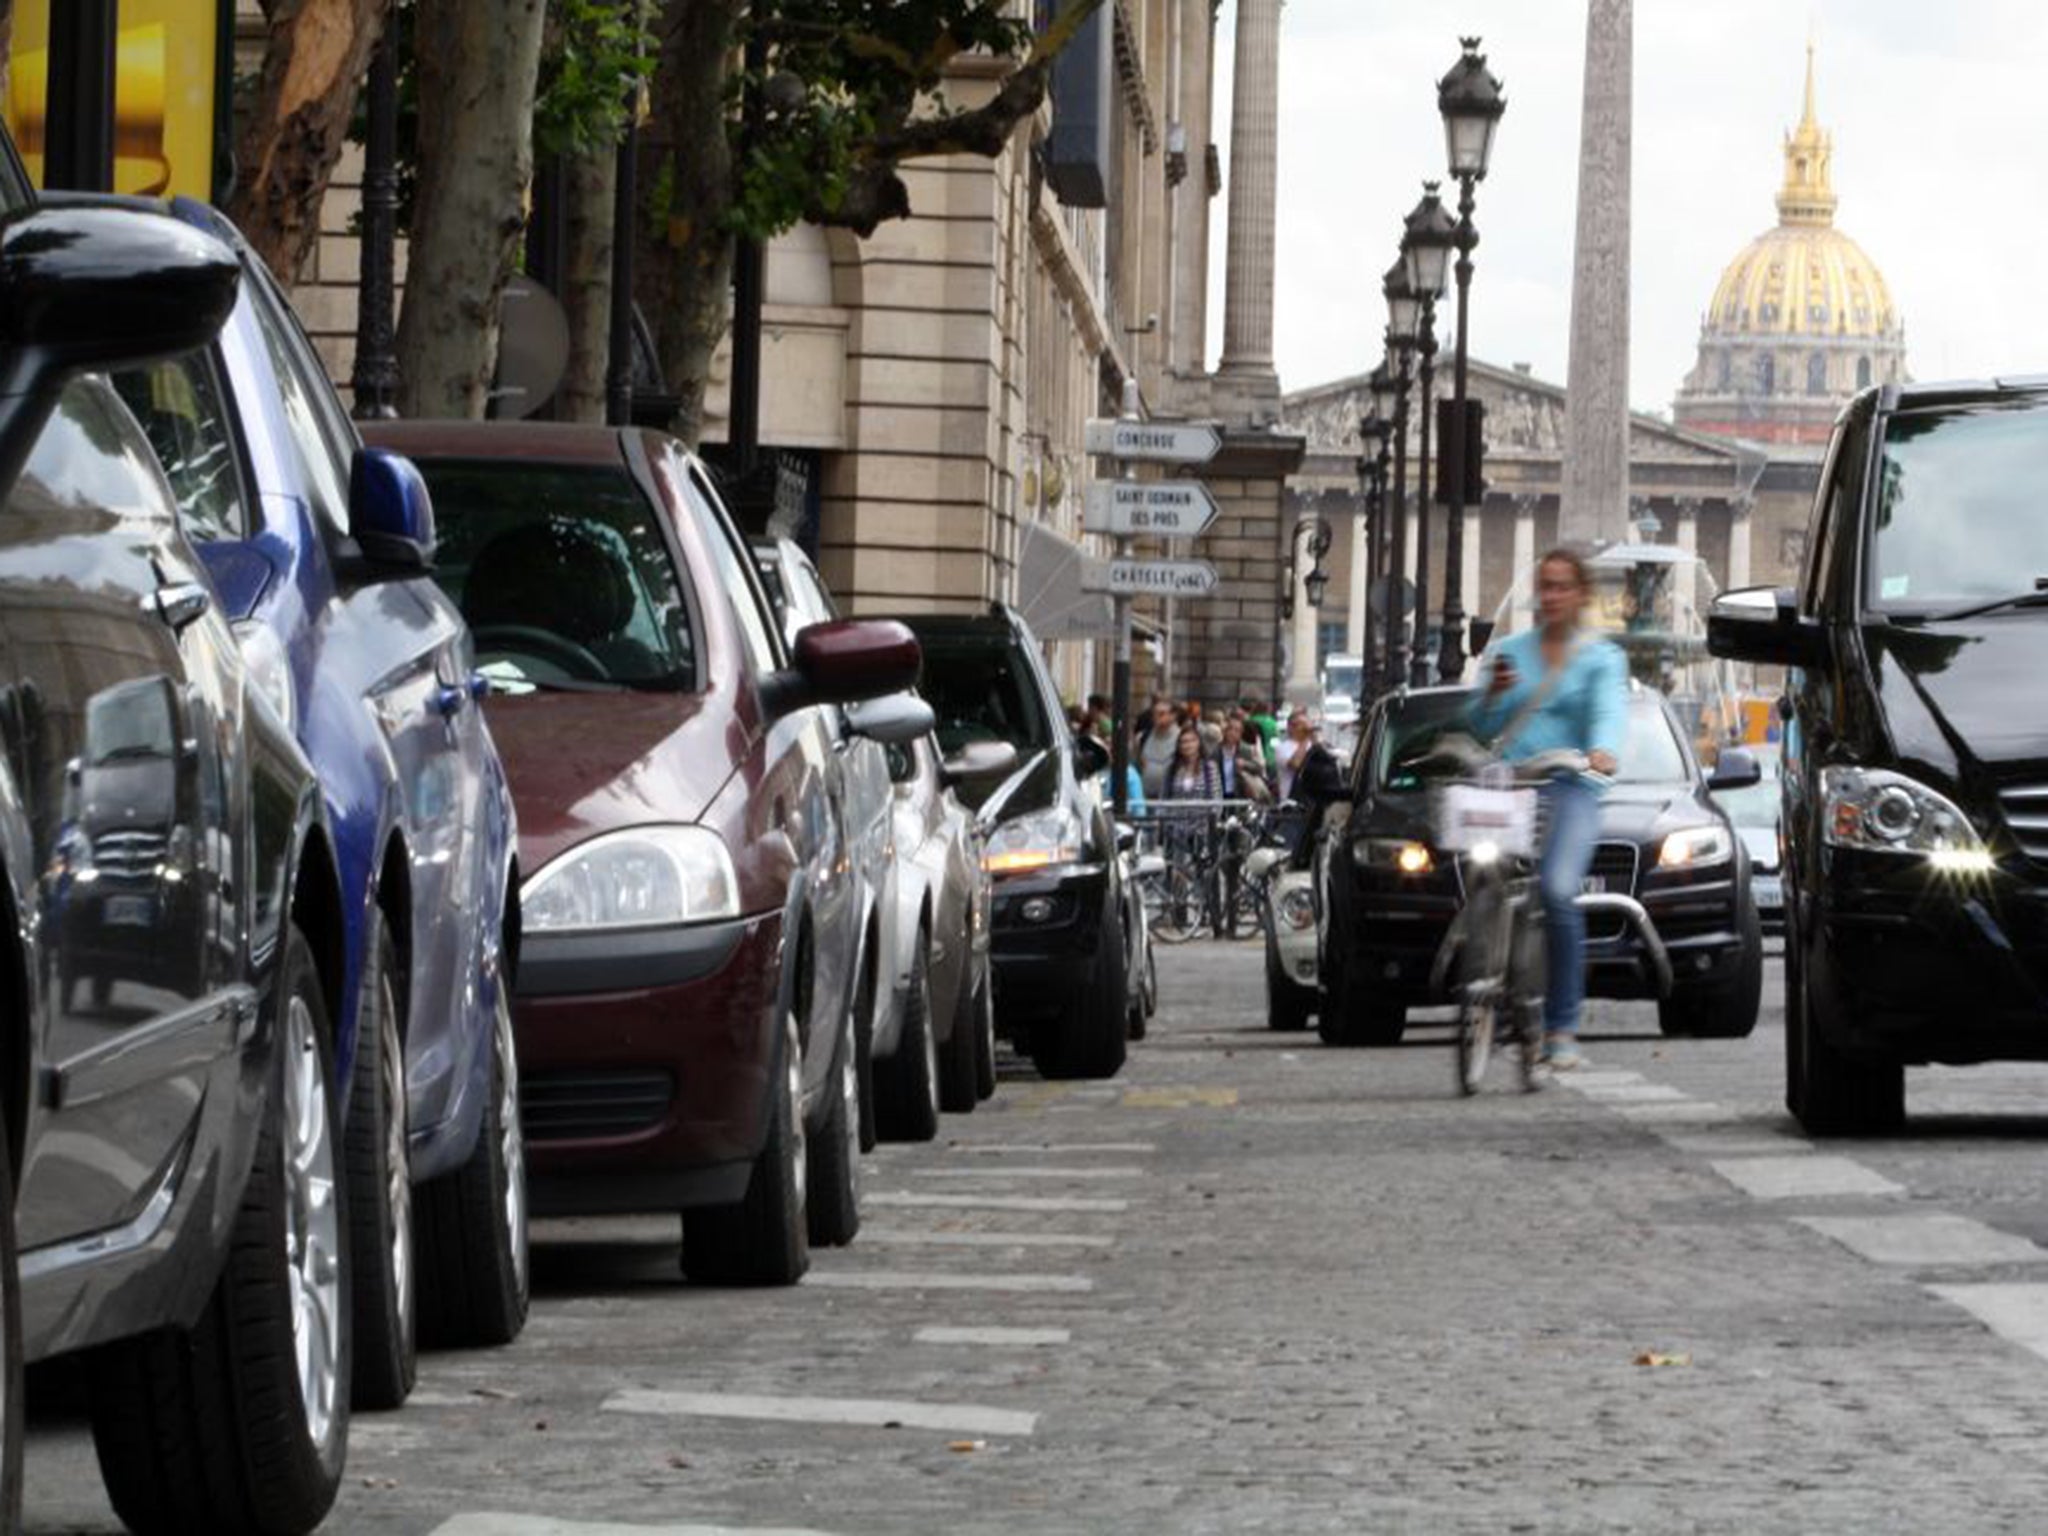 Over the last ten years, Paris has lost more than fifteen per cent of its parking spaces